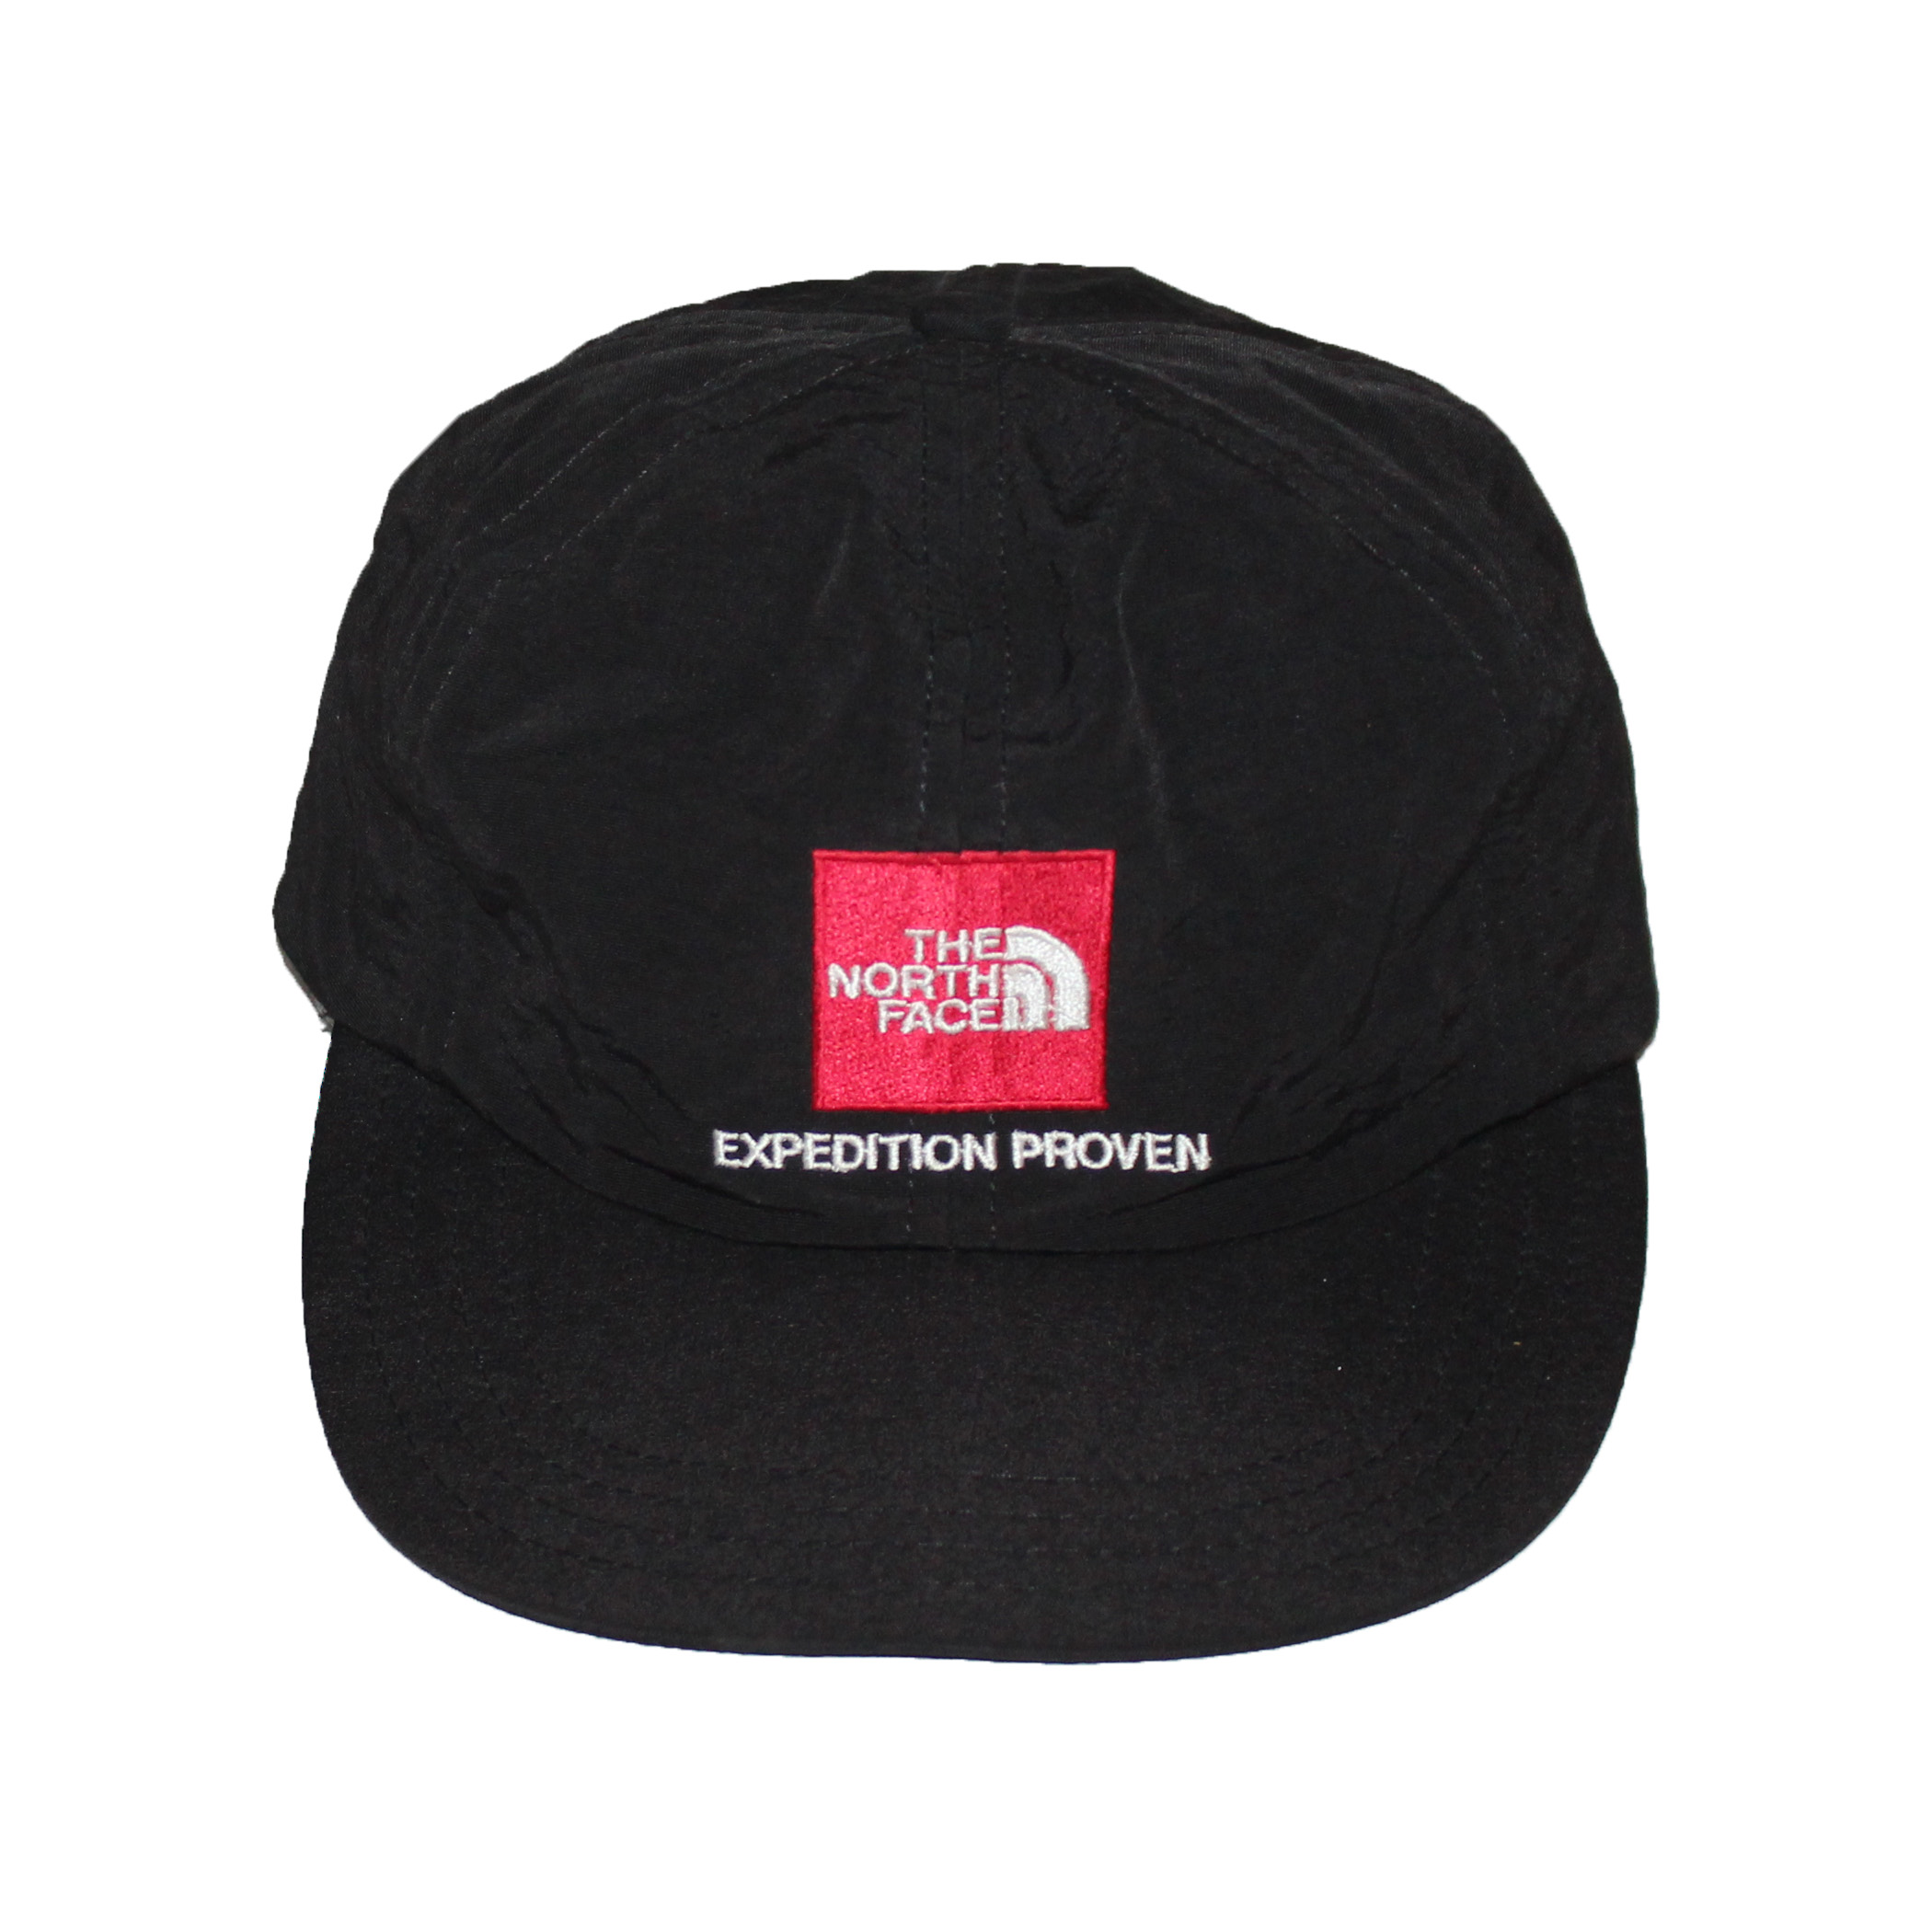 The North Face Expedition Proven Black / Red Hat (Size S/M) — Roots